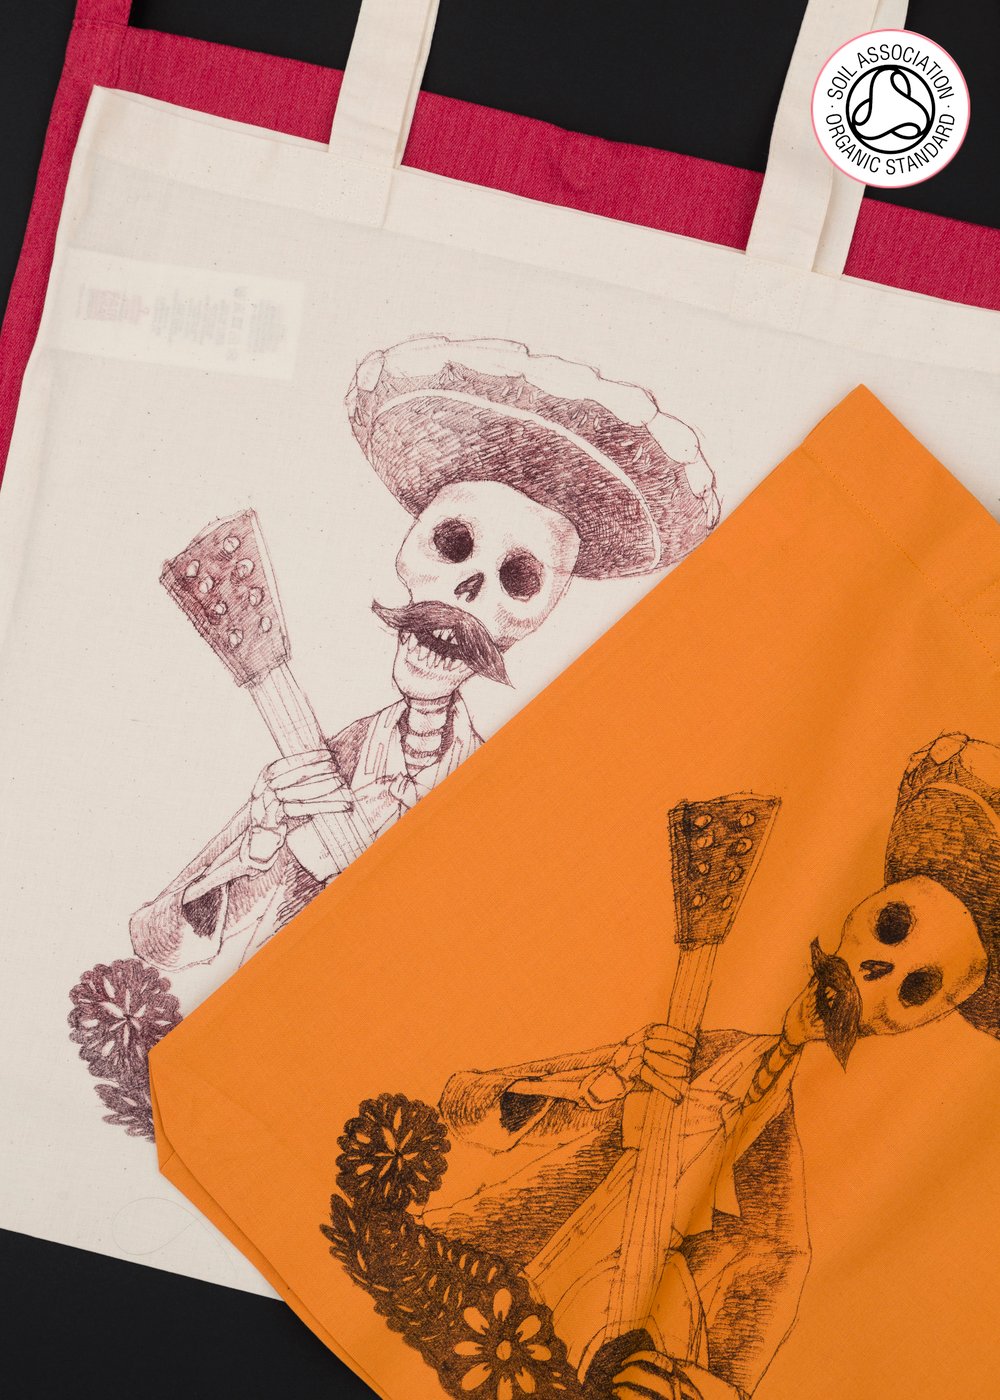 Day of the Dead Tote Shopping Bags (Various)